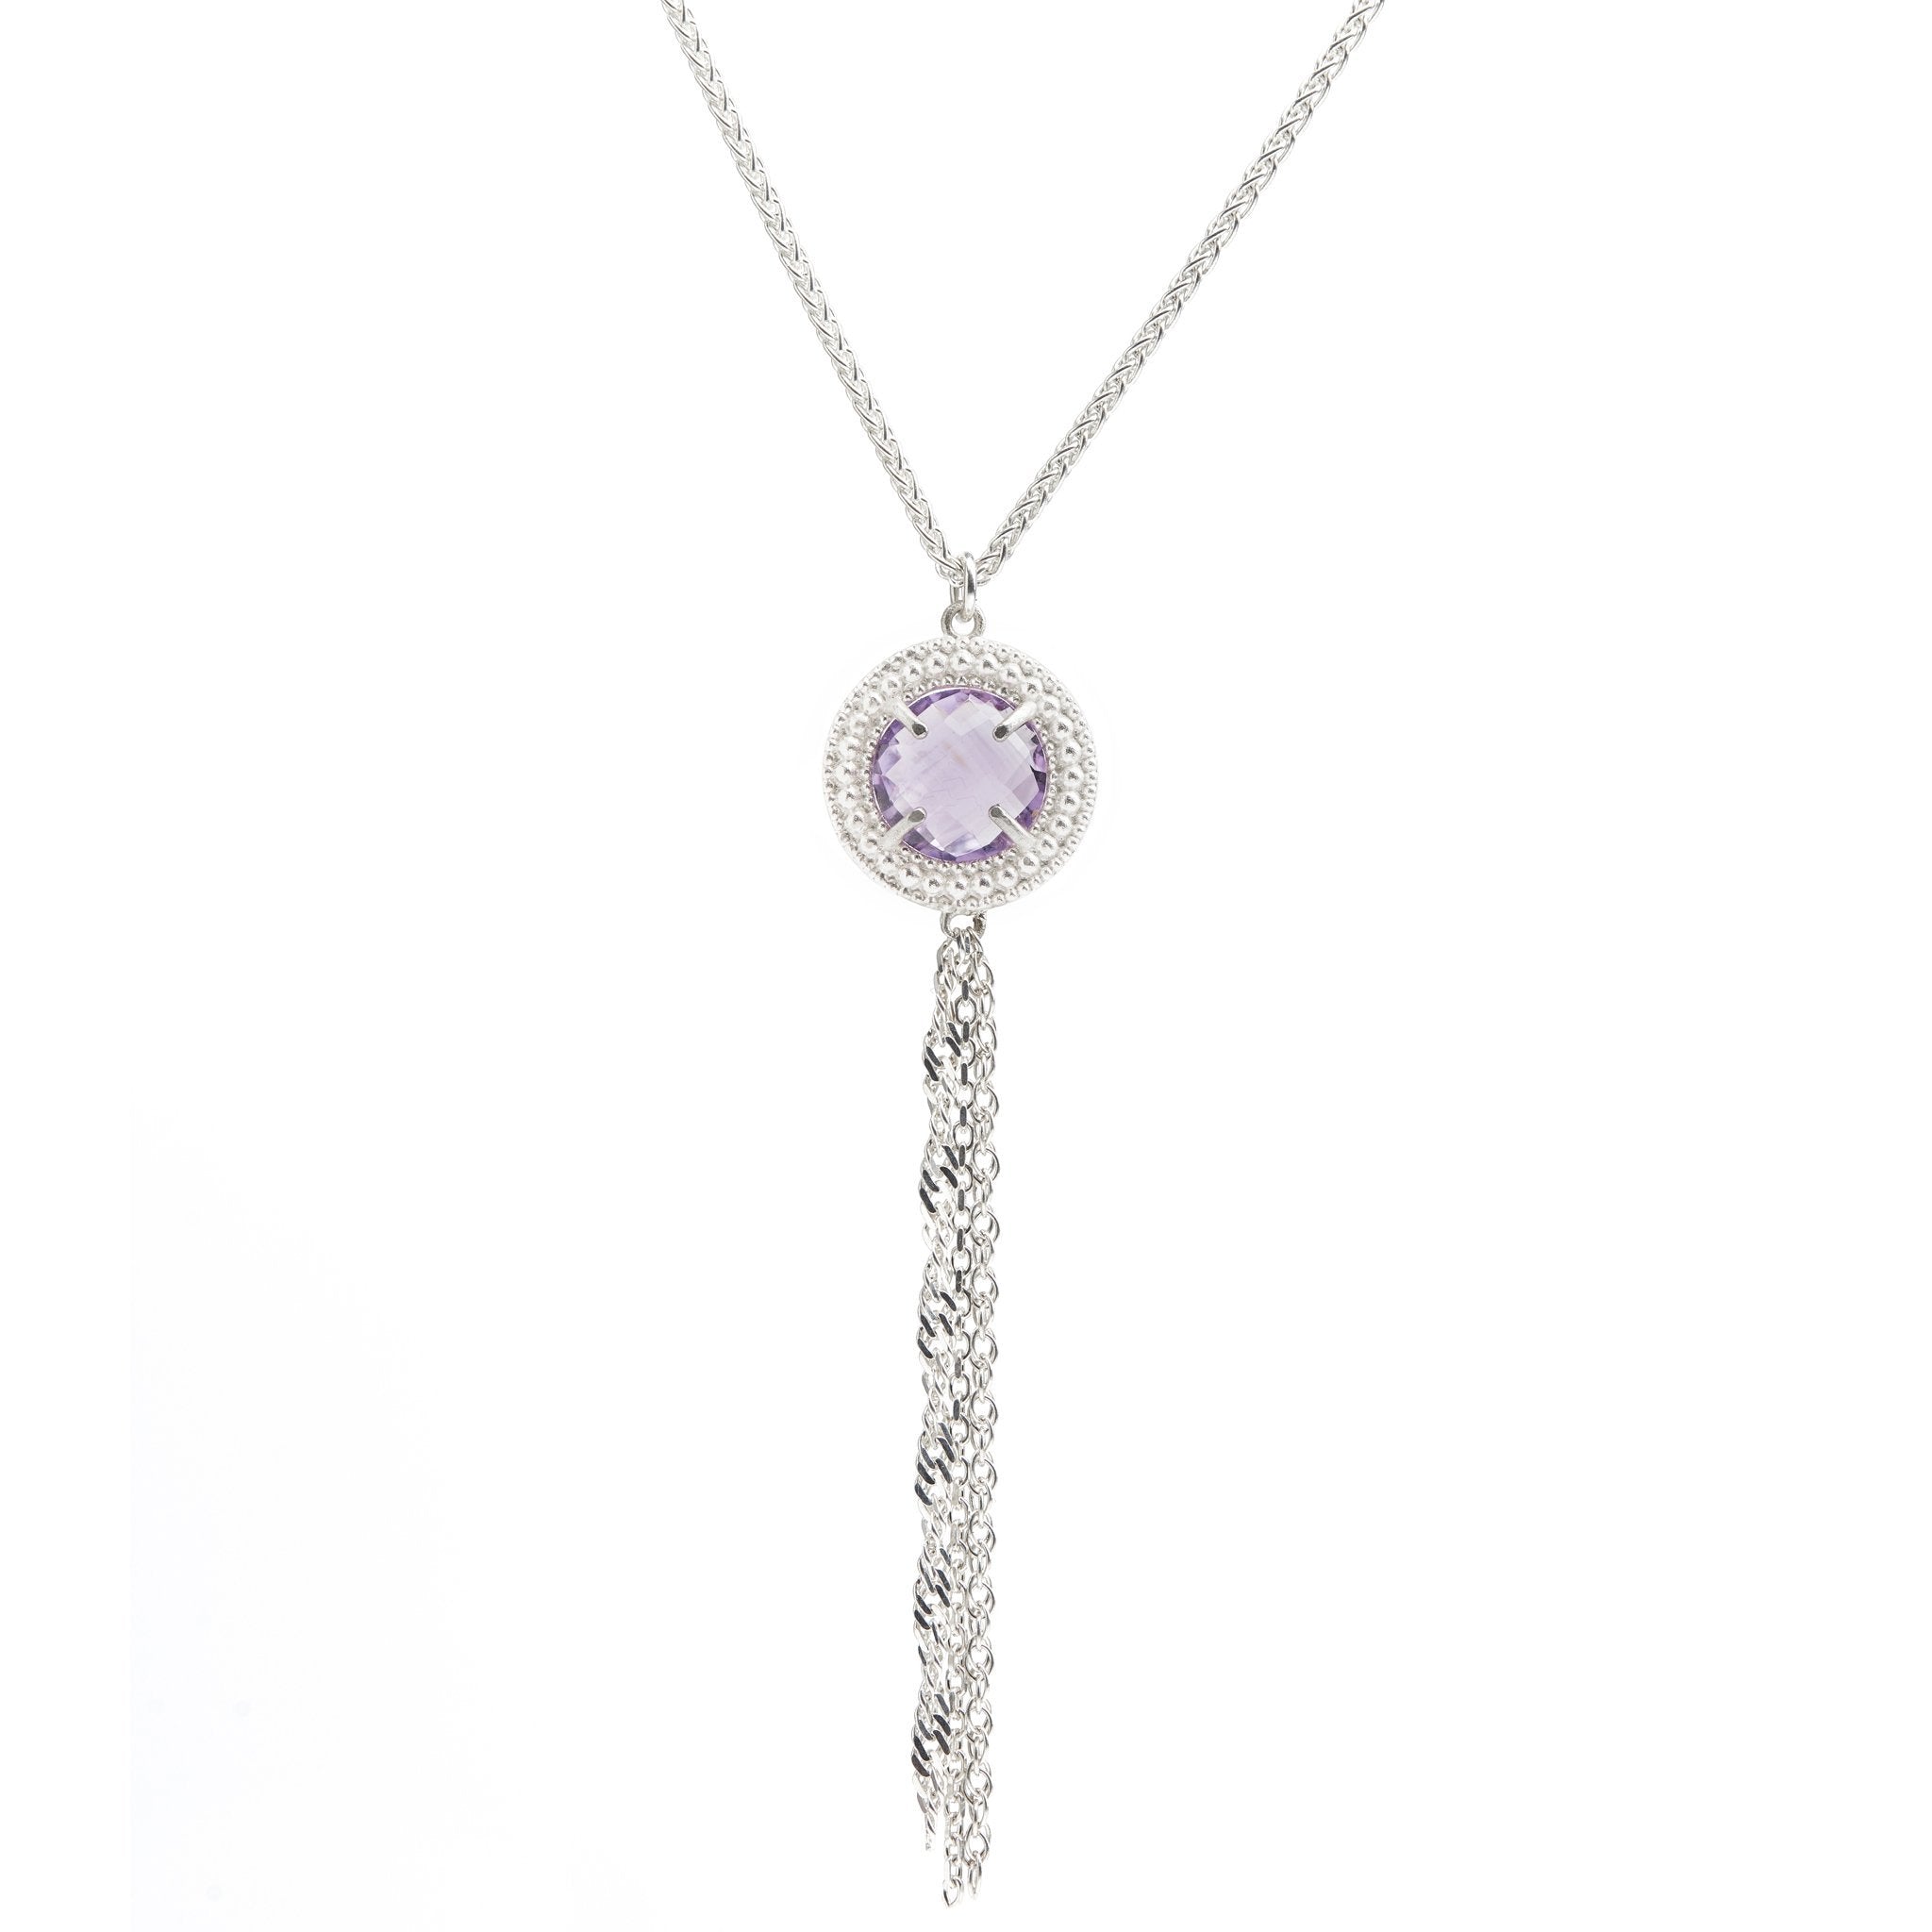 The Renaissance Ethnic necklace in Purple Amethyst - Christelle Chamberland